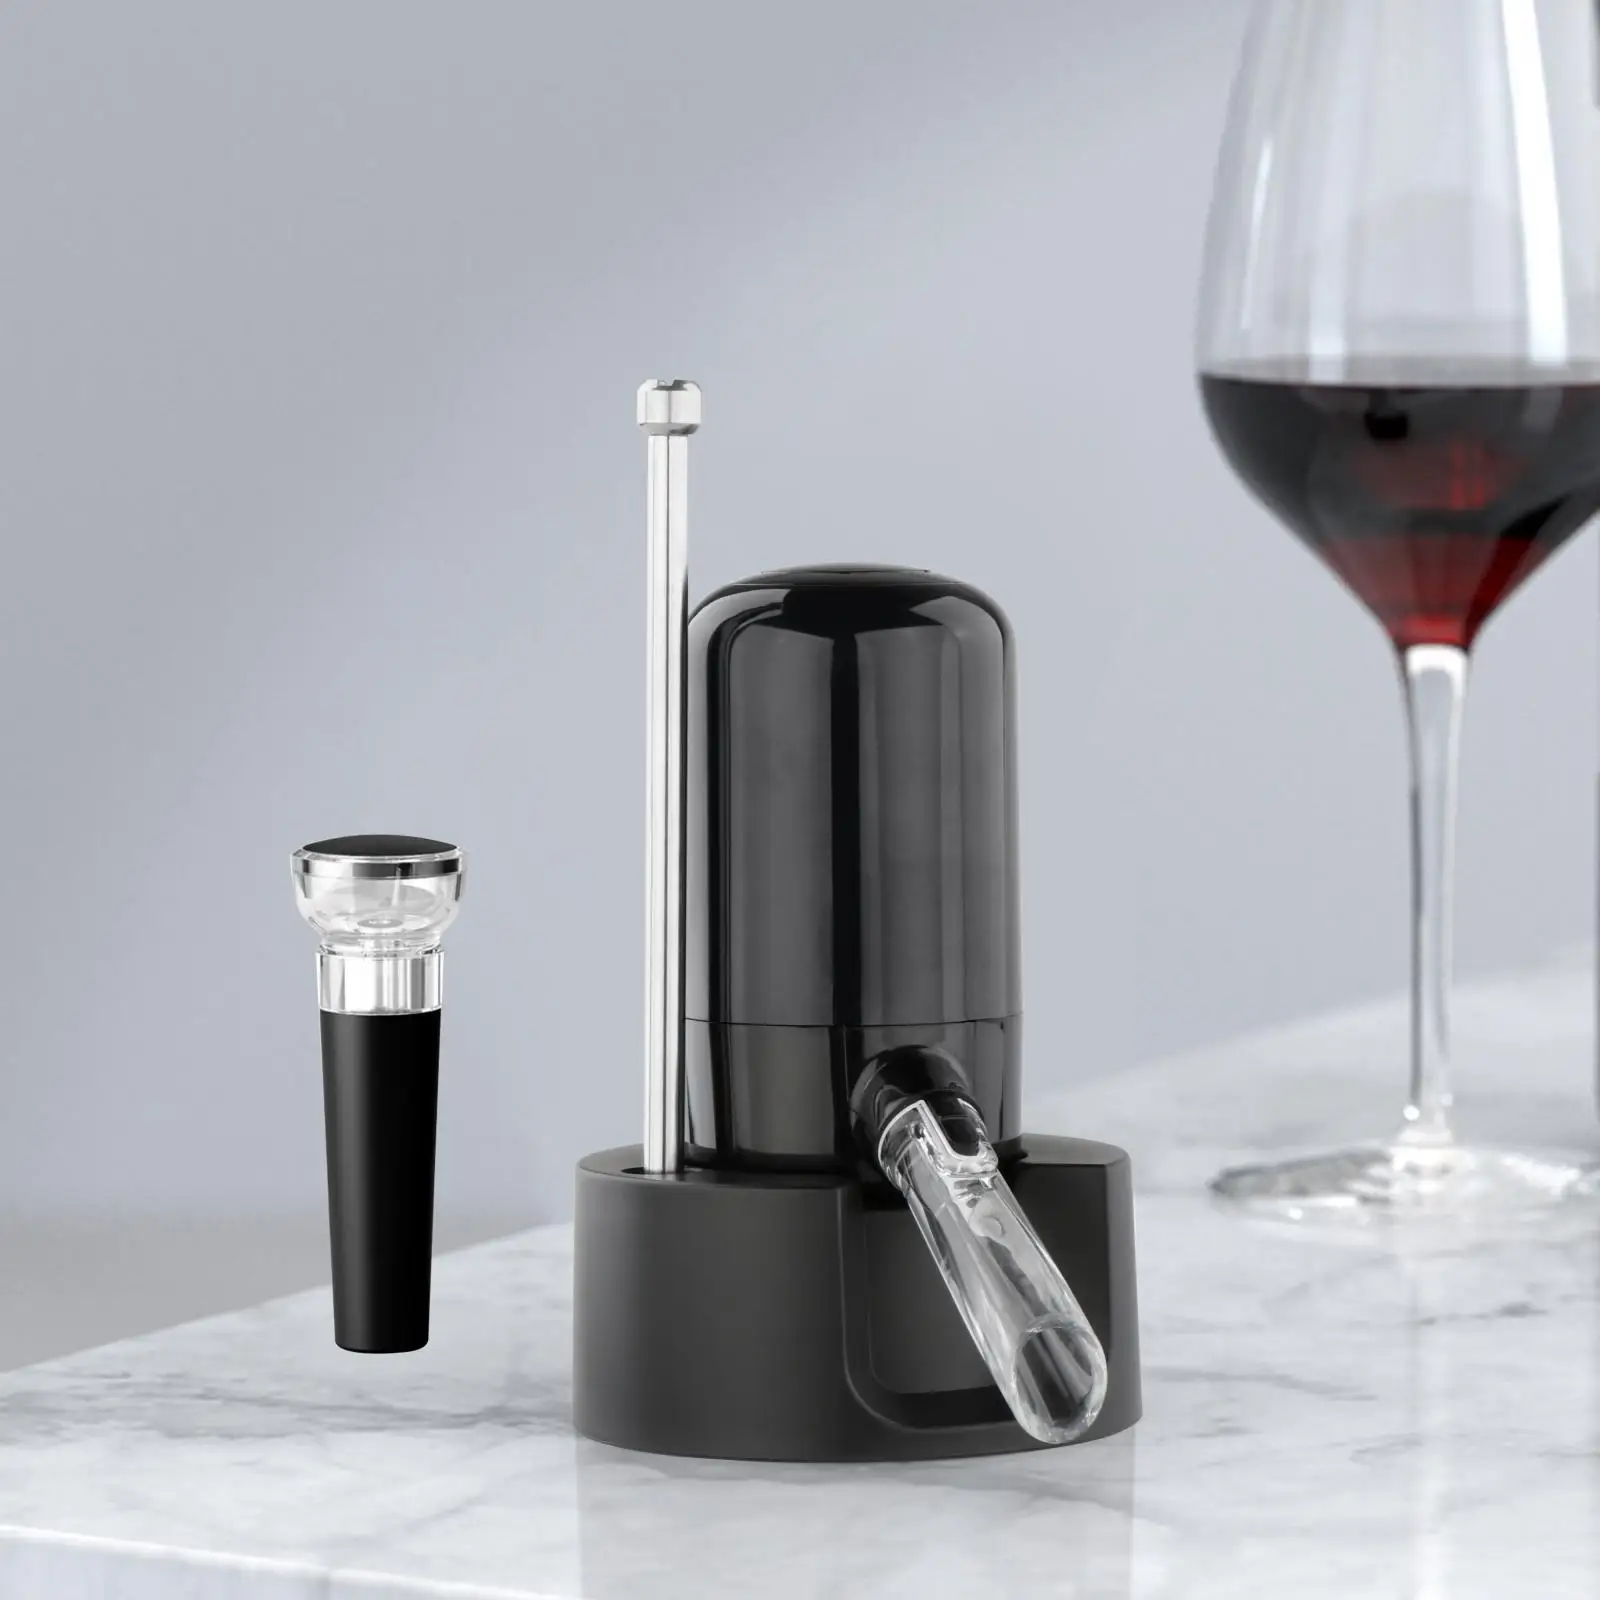 Wine Aerator Pourer Wine Supplies Quick Sobering for Wine Gift Kitchen